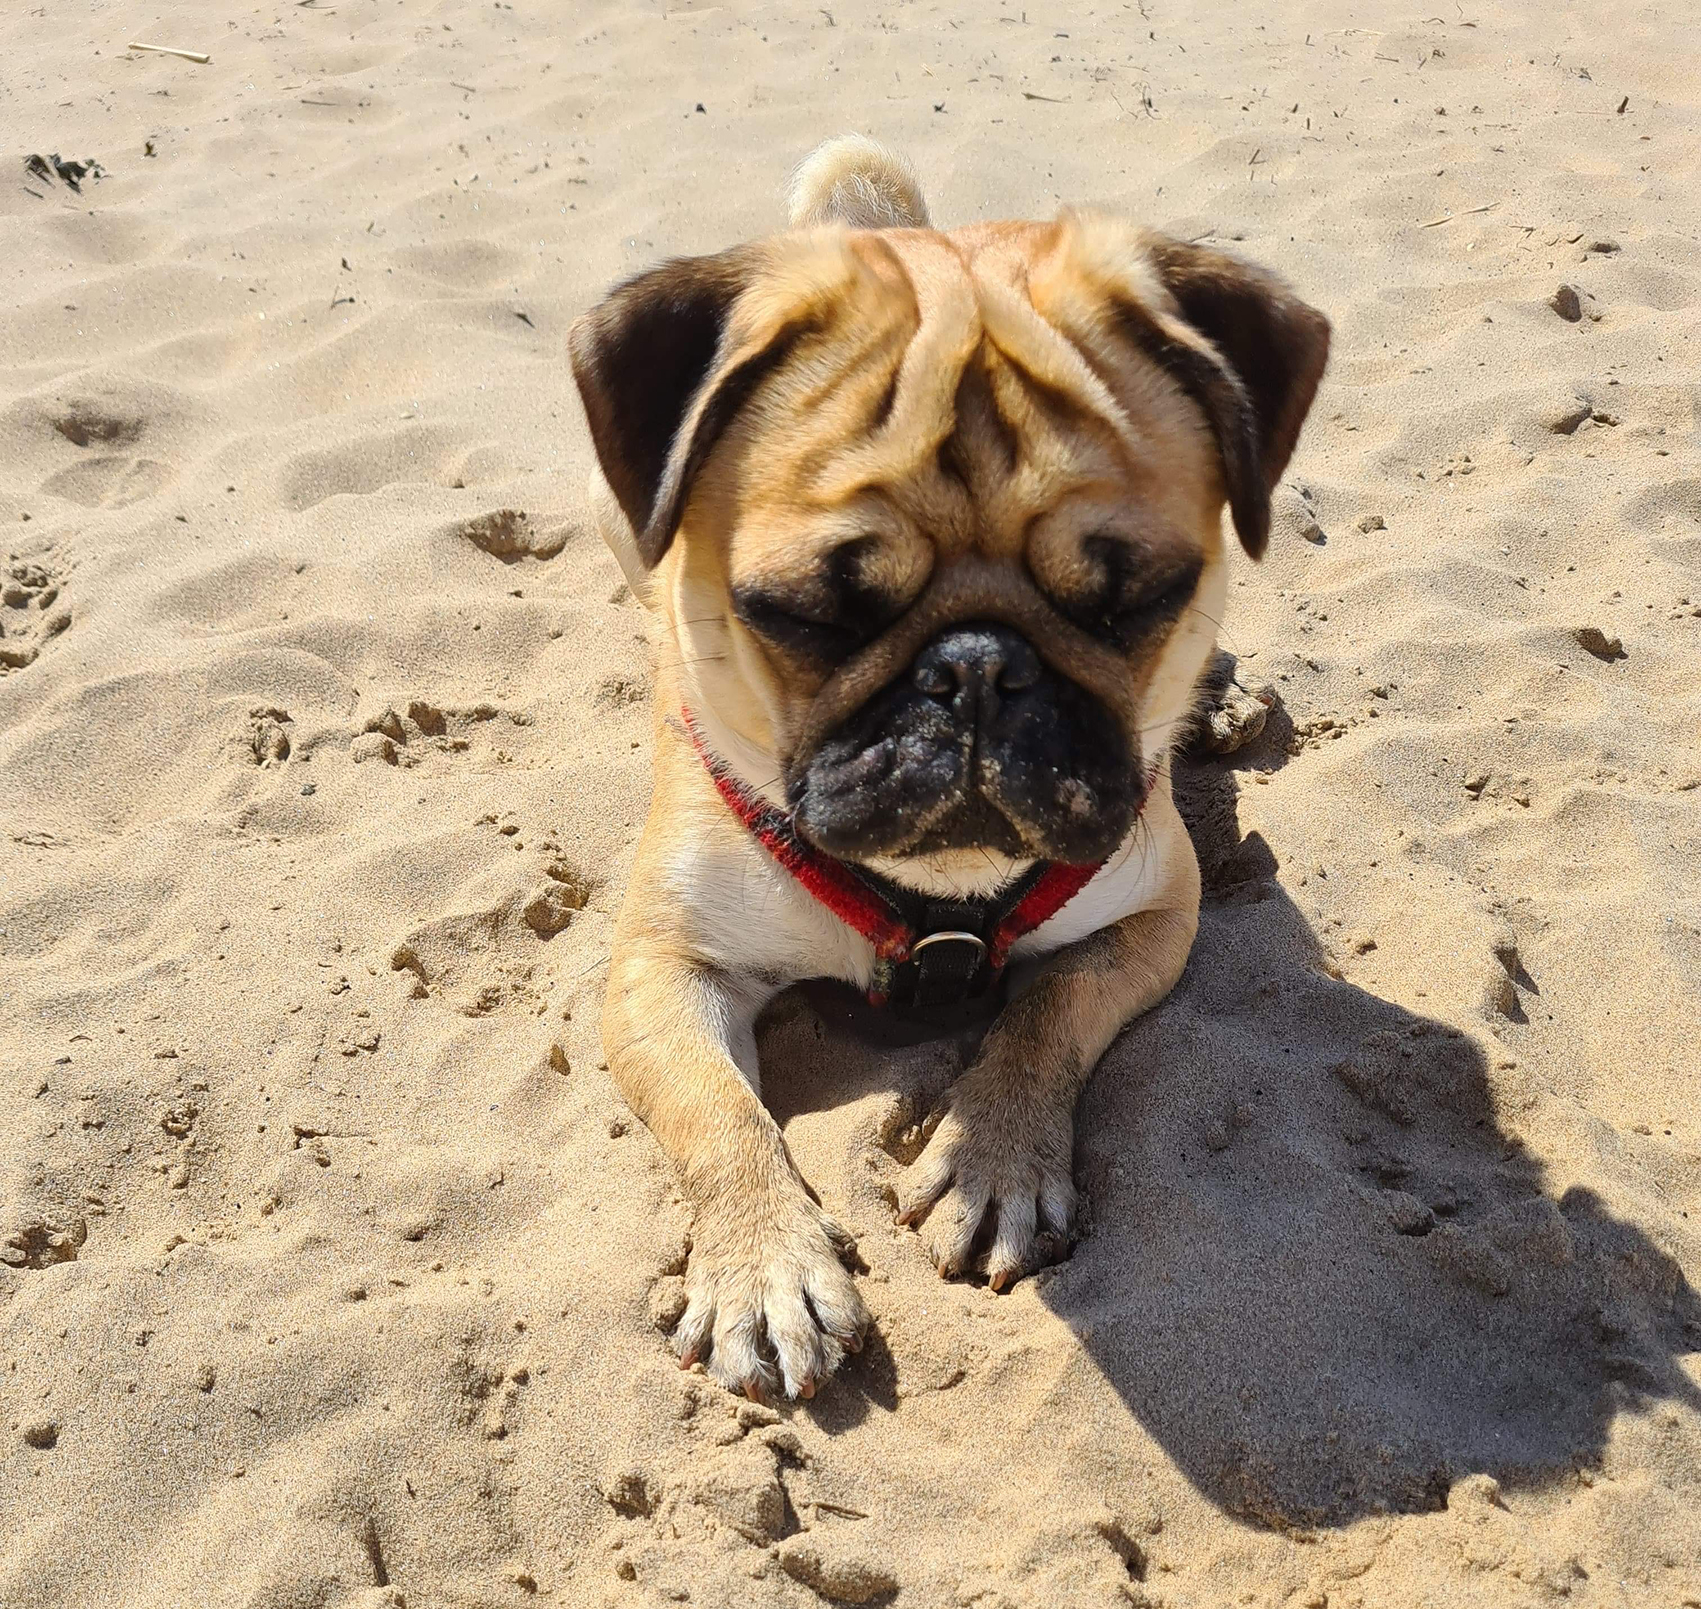 A new home for Bob - image Beau on https://pugprotectiontrust.org